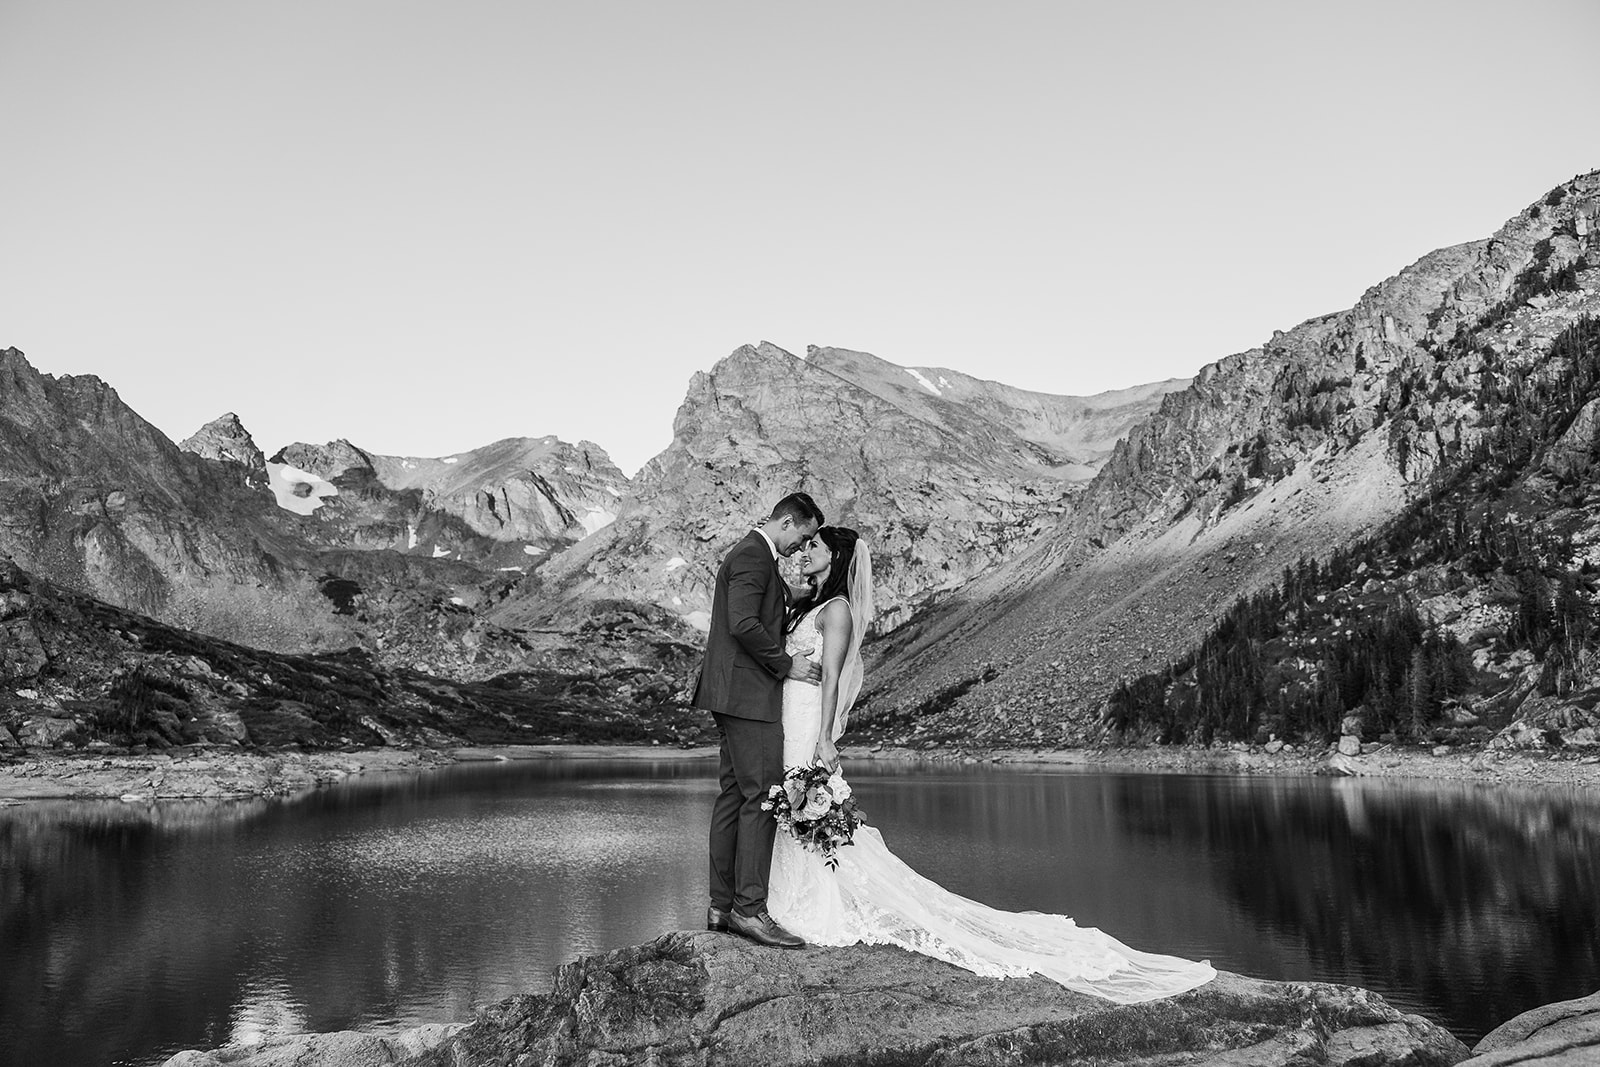 bride and groom embrace on a rock overlooking a lake